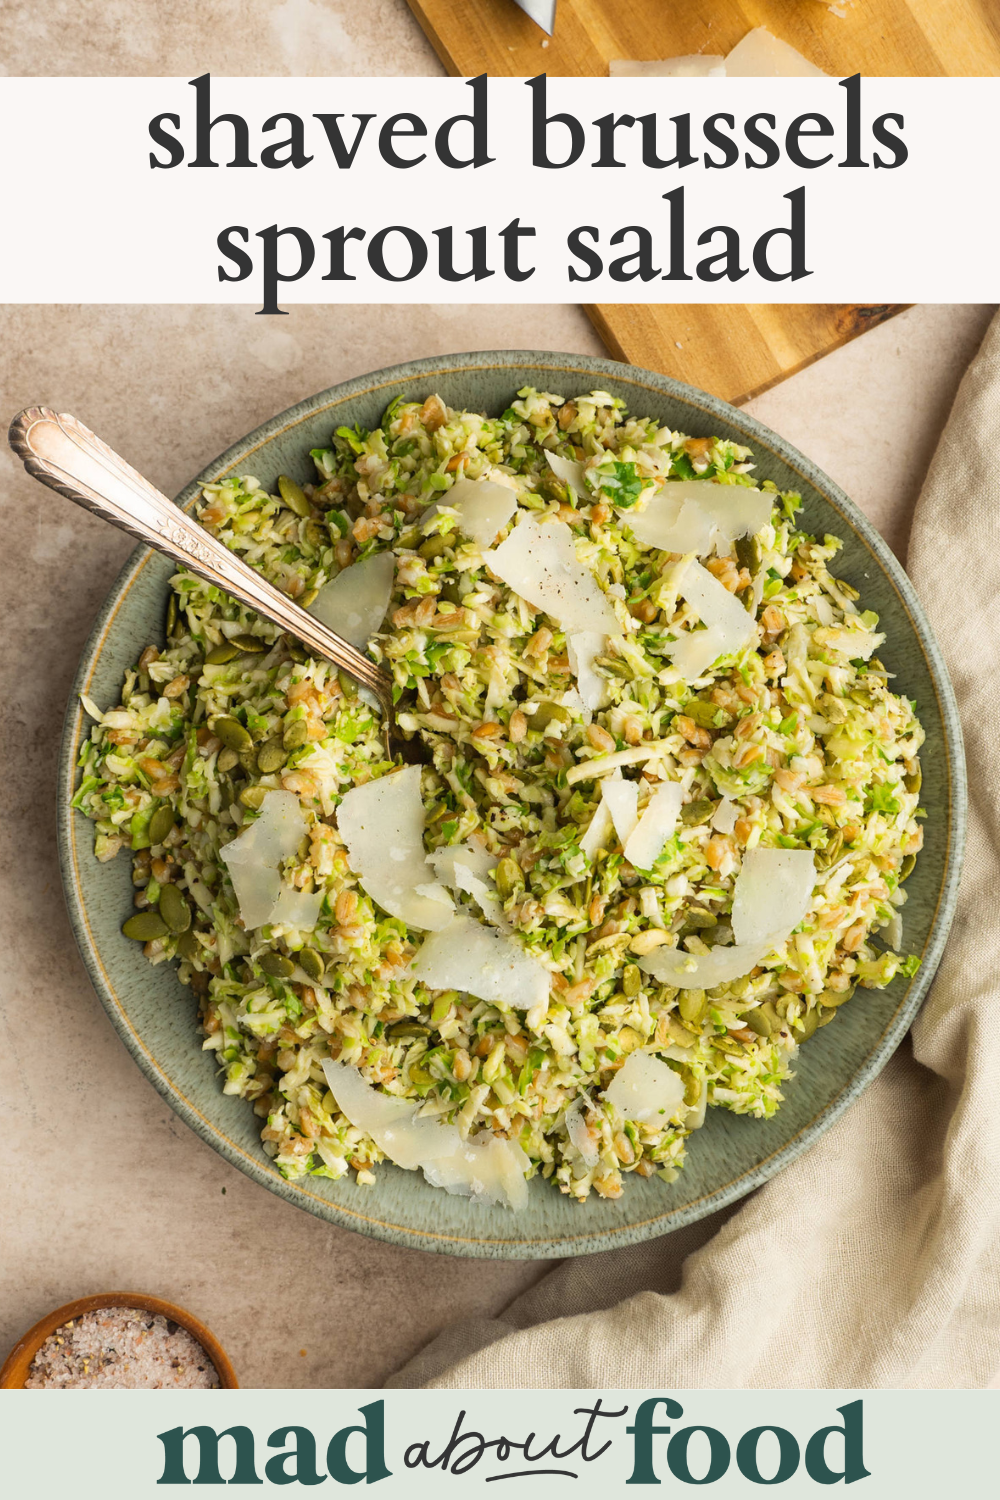 Image for pinning Shaved Brussels Sprout Salad on PInterest